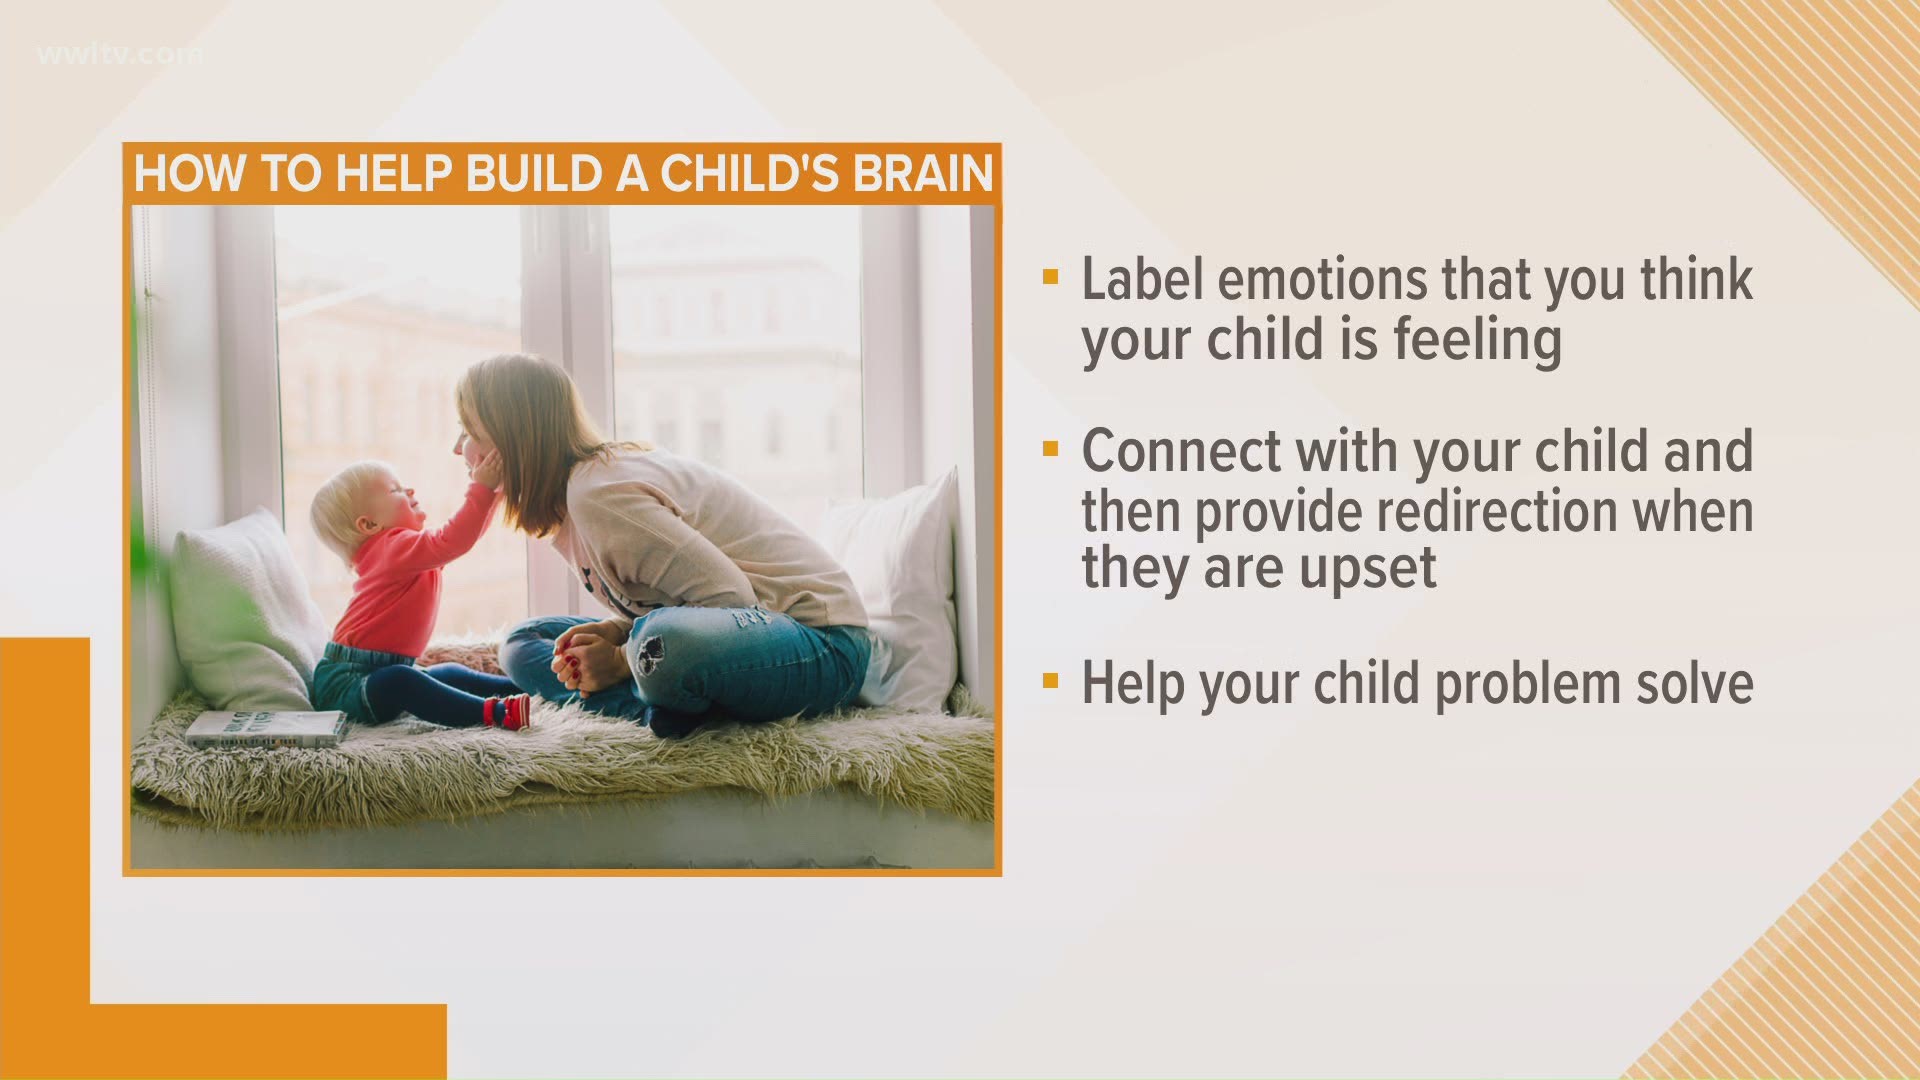 Monet Sommerville with the Parenting Center at Children's Hospital explains how your child's brain development can affect behavior, and what you can do about it.